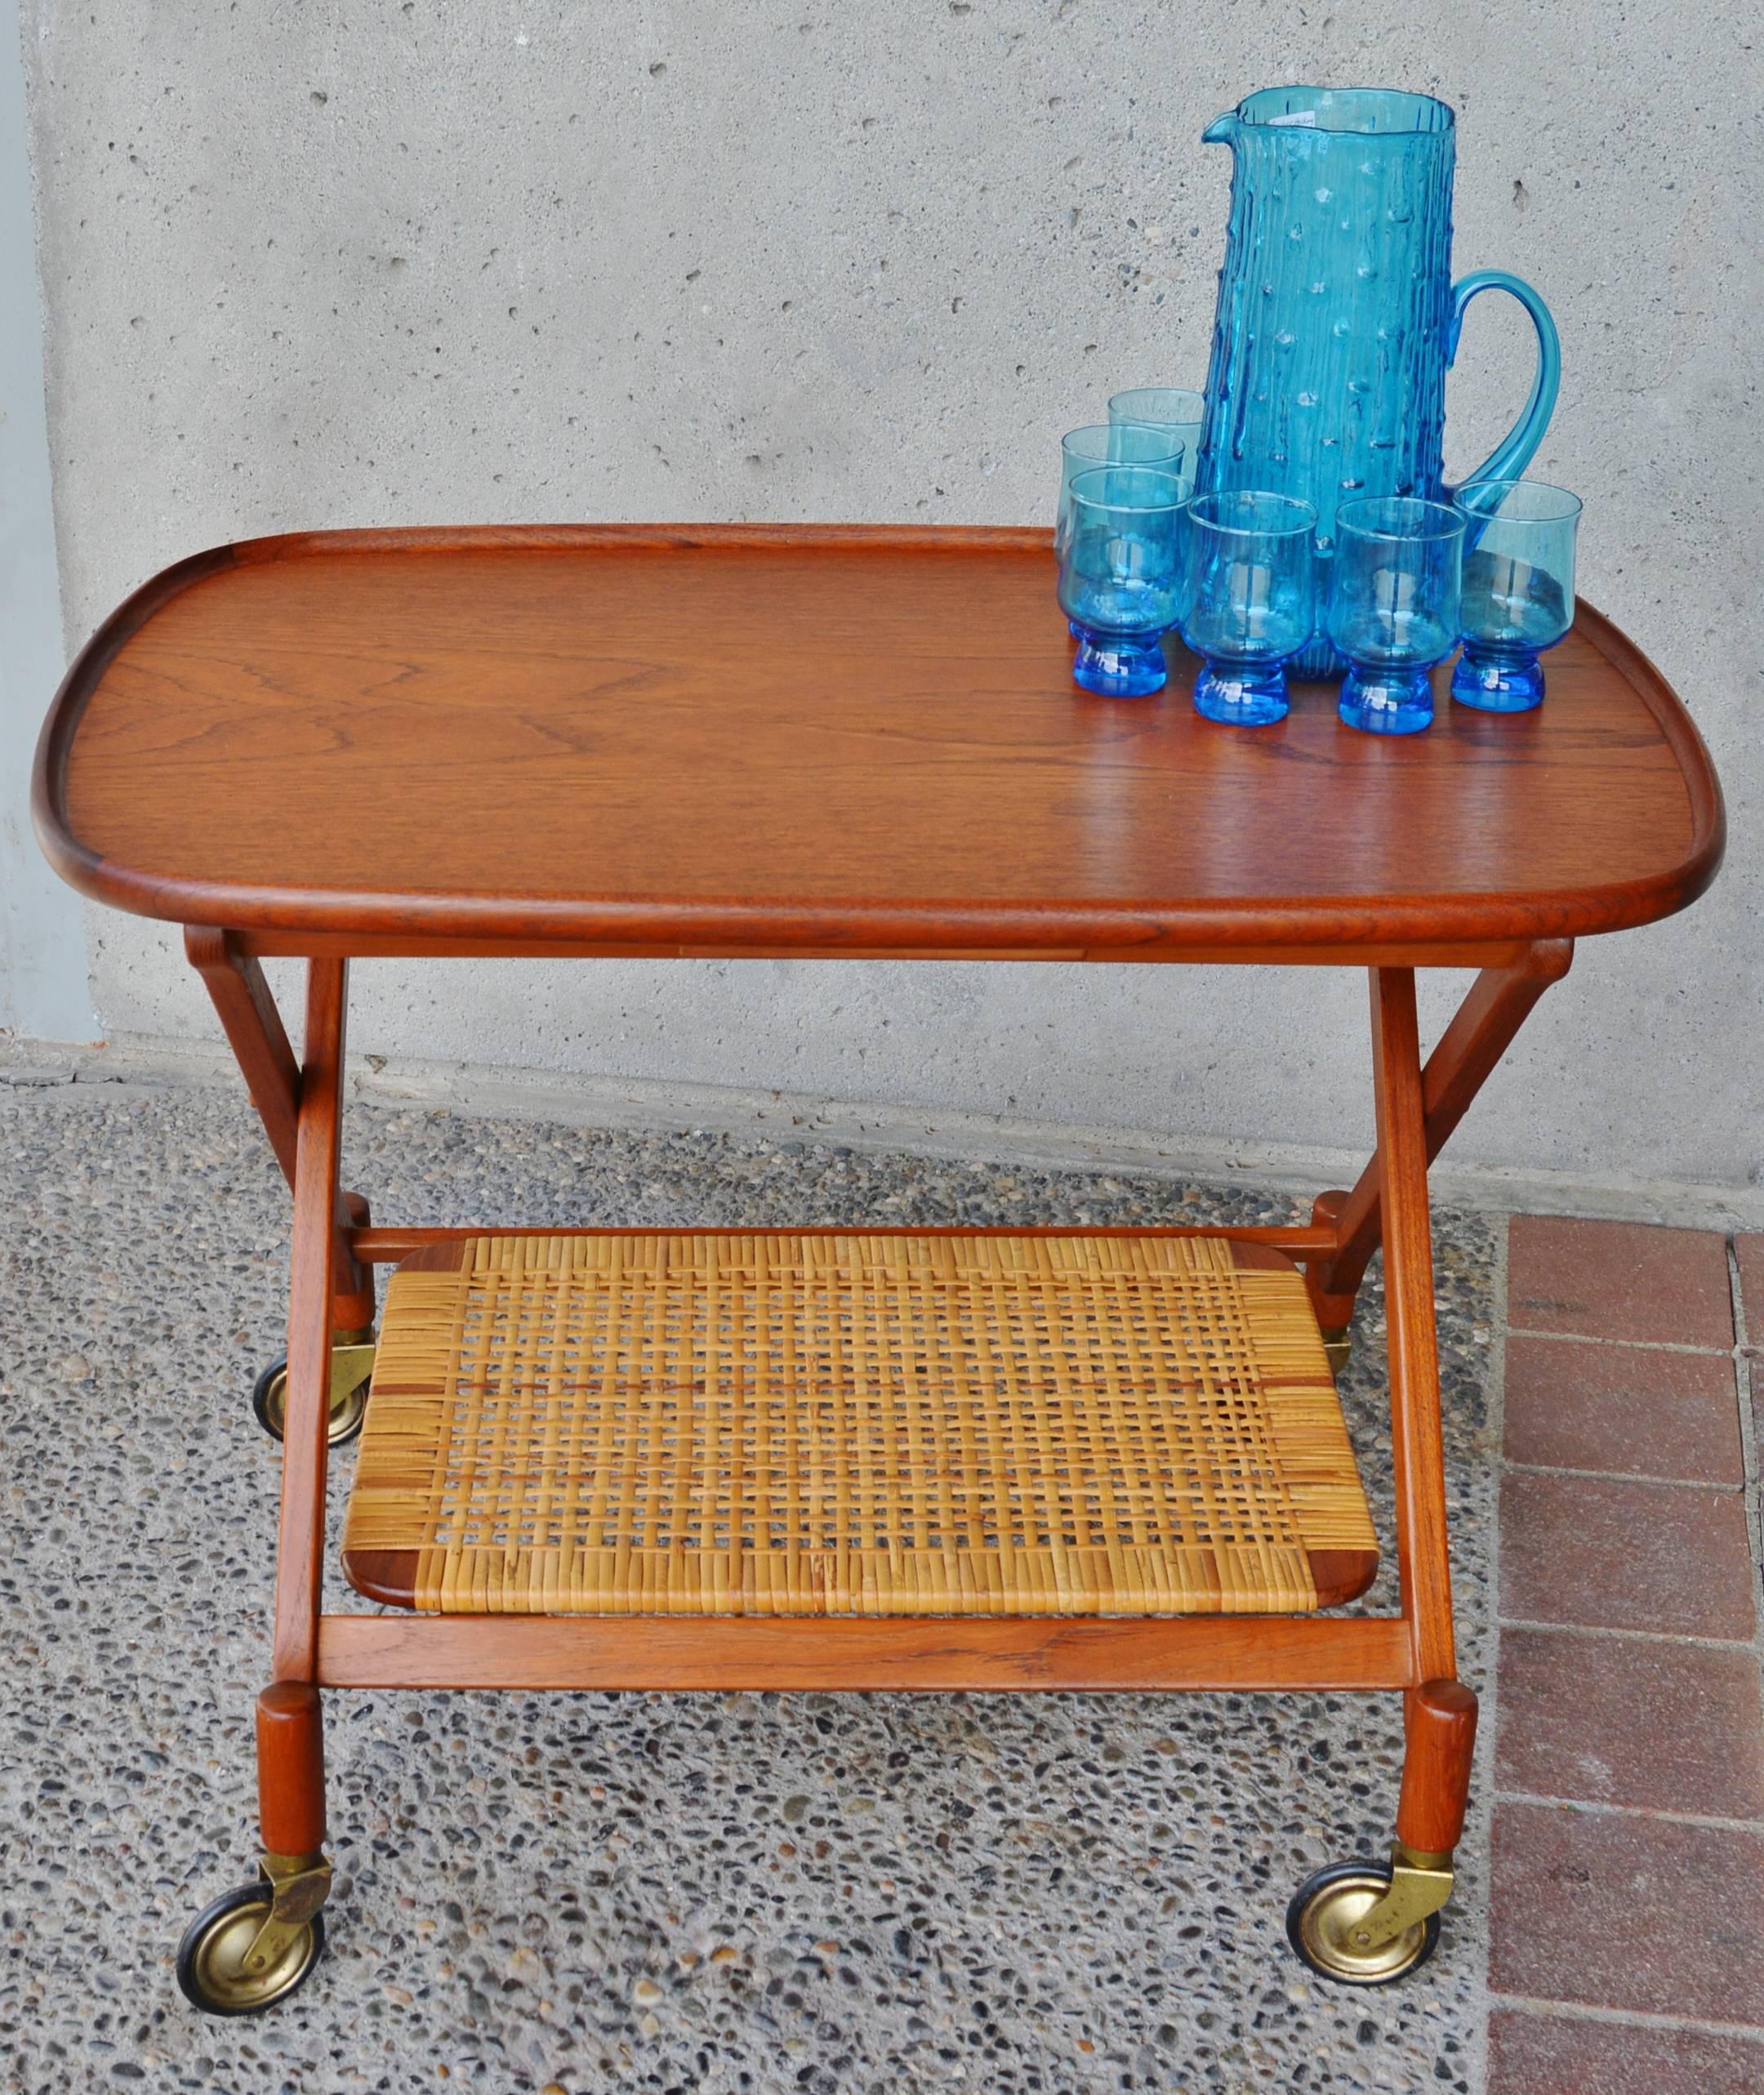 This gorgeous Danish modern quality teak bar cart has impeccable detailing throughout! The ovoid top has a lovely flared lip, the scissor legs are dramatic and the conical leg extensions above the Classic 1950s casters are amazing! Finally, the